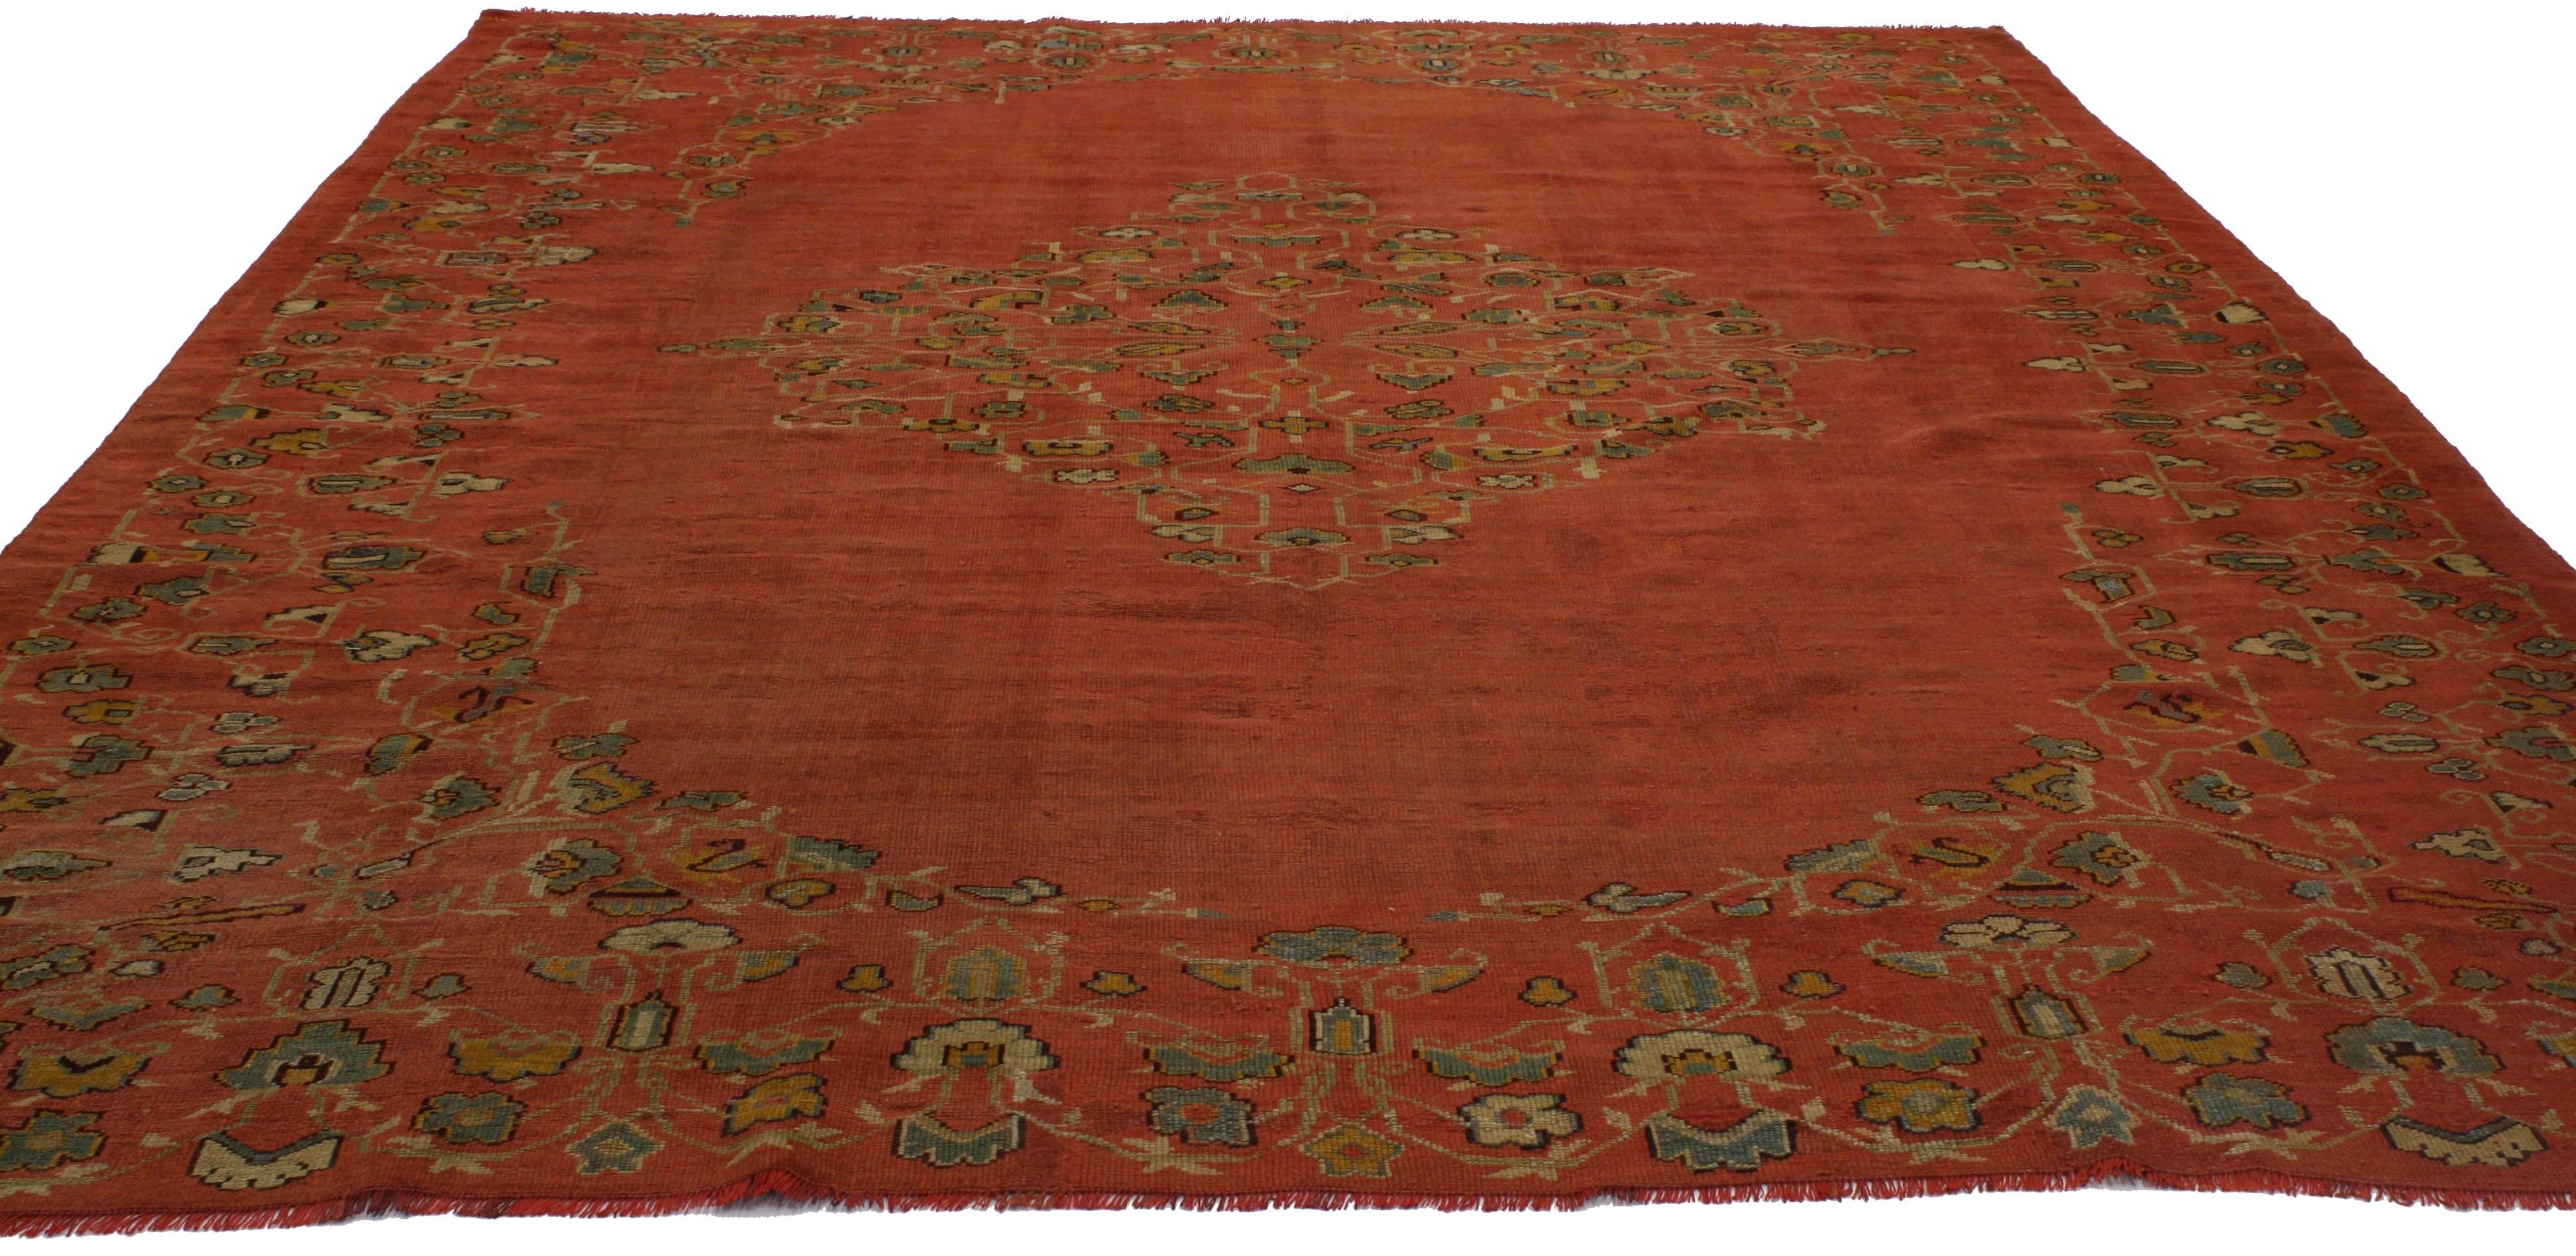 76655 Antique Turkish Oushak Area Rug with Traditional Style 09'02 x 11'02. Imbued with sunbaked earthy hues and rustic sensibility, this hand knotted wool antique Turkish Oushak rug will take on a curated lived-in look that feels timeless while